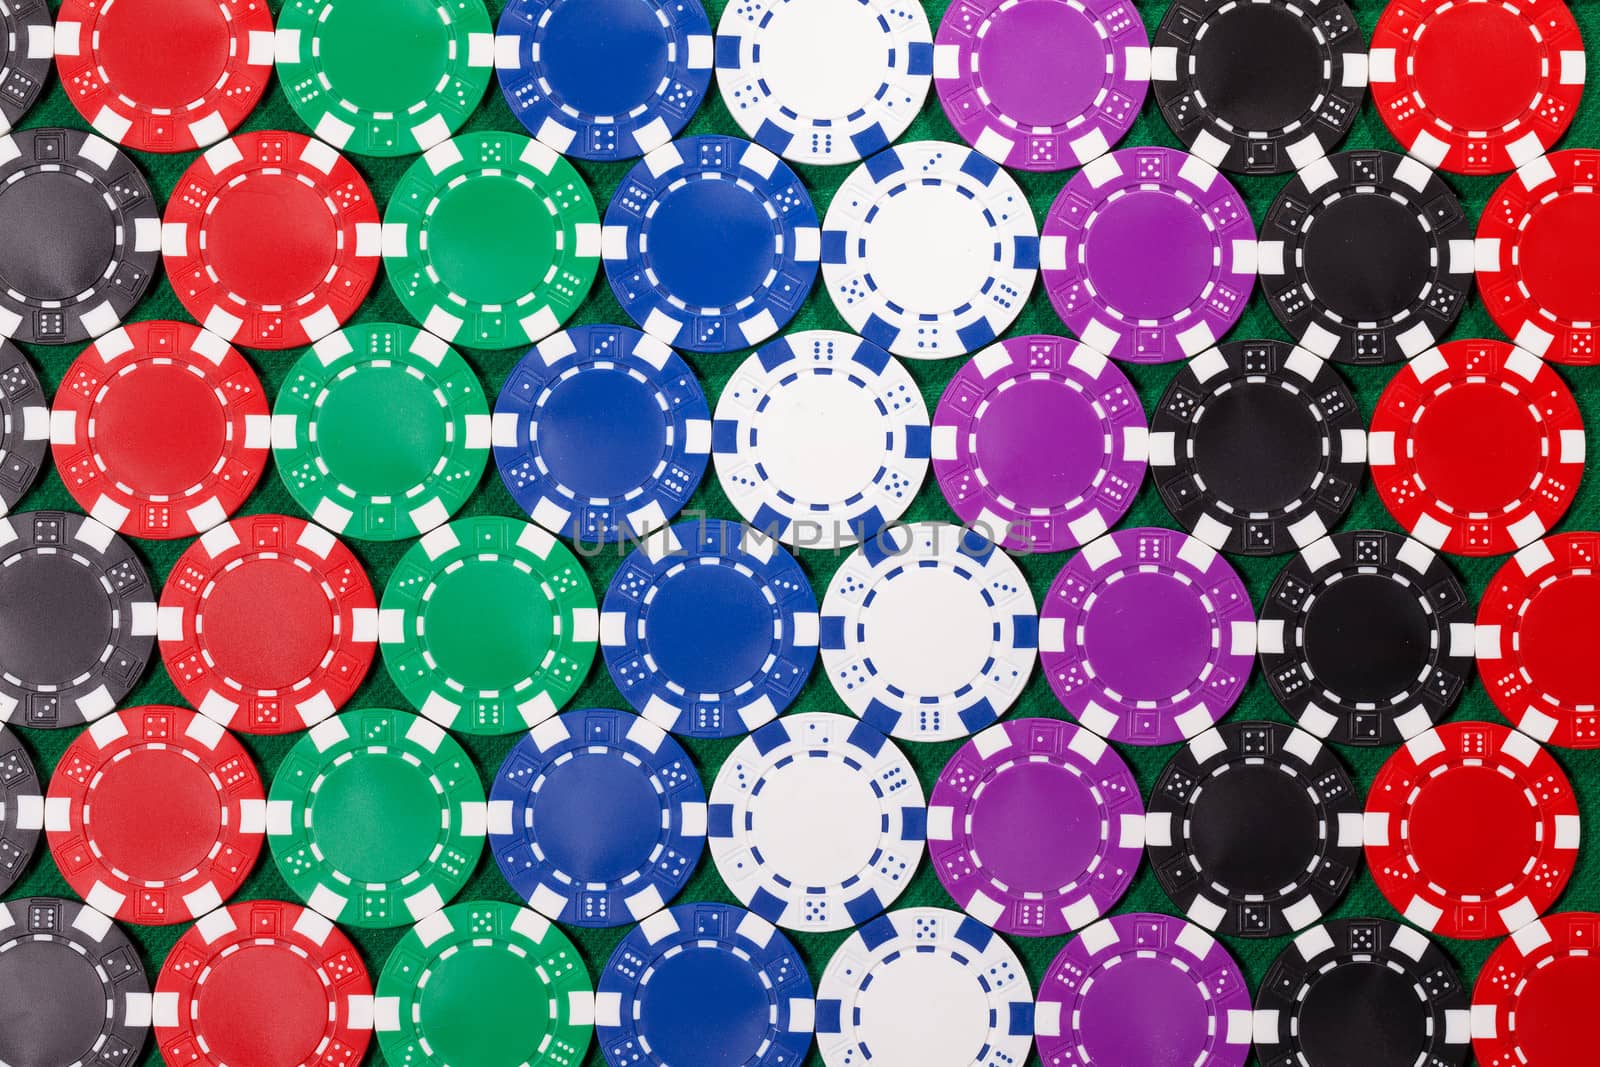 Colorful poker chips by Discovod